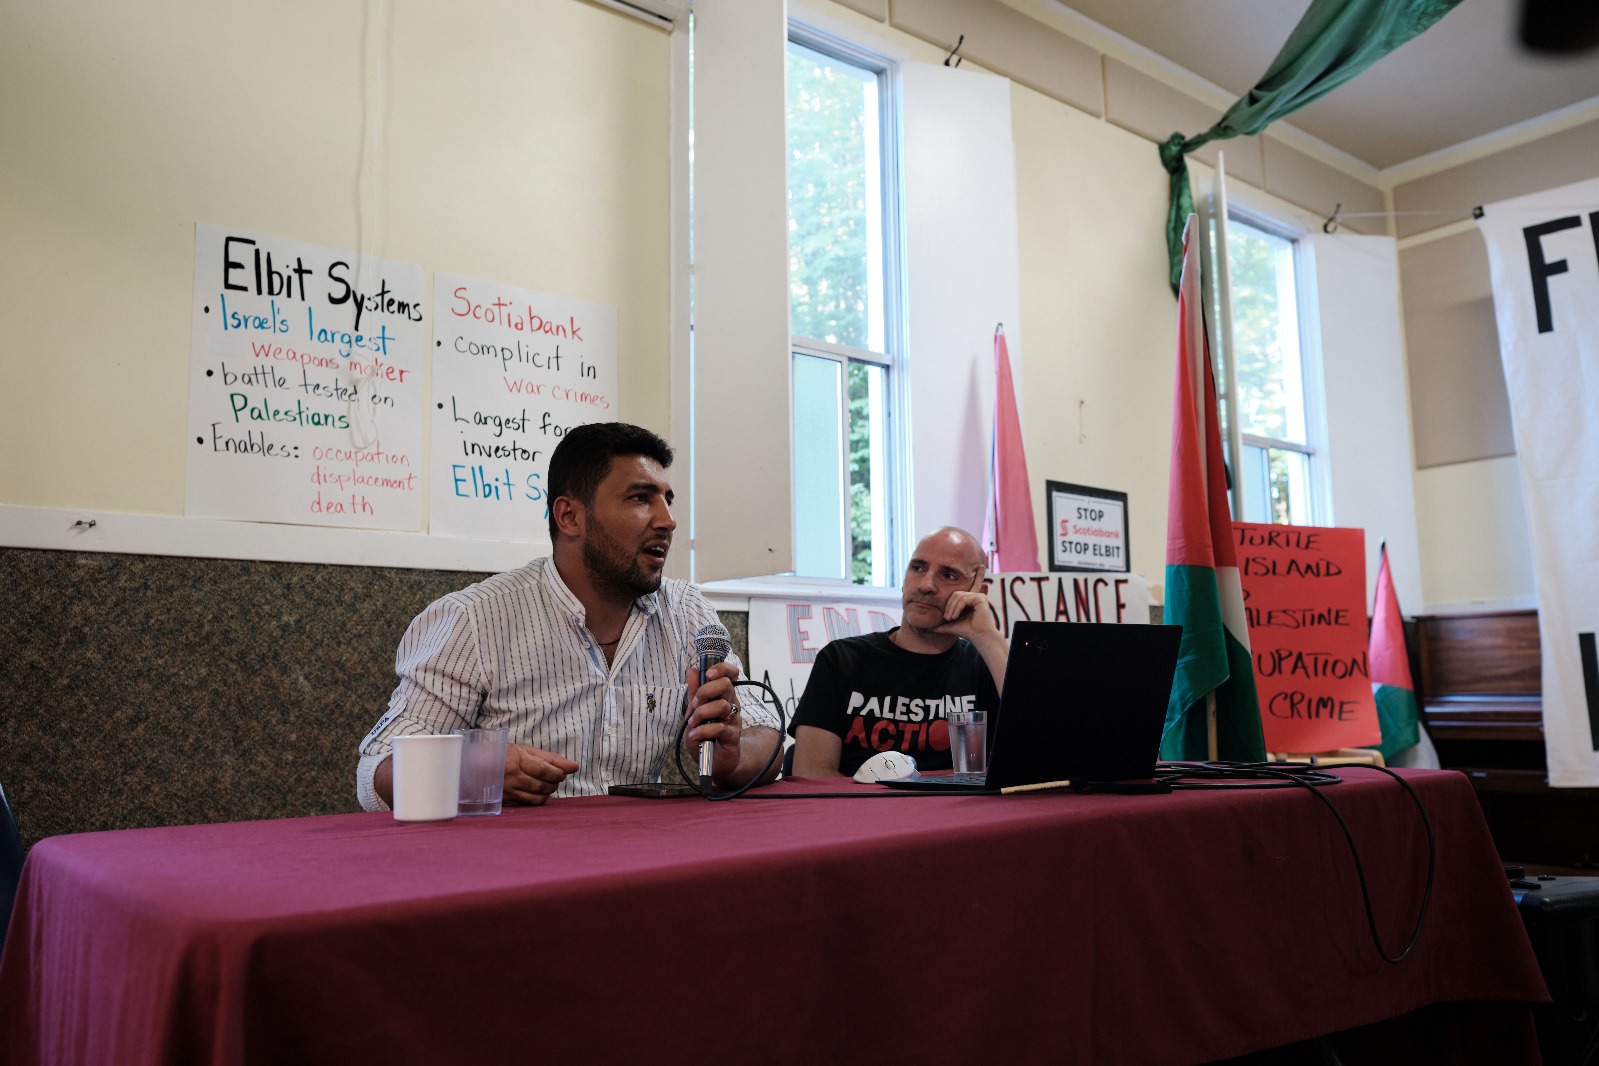 Ronnie Barkan looks intently at Mohammed Al Zaza while Zaza delivers a speech. They are sat at a long table with a red table cloth. There are informative posters about Palestine Action behind them and they are surrounded by a few Palestinian flags.